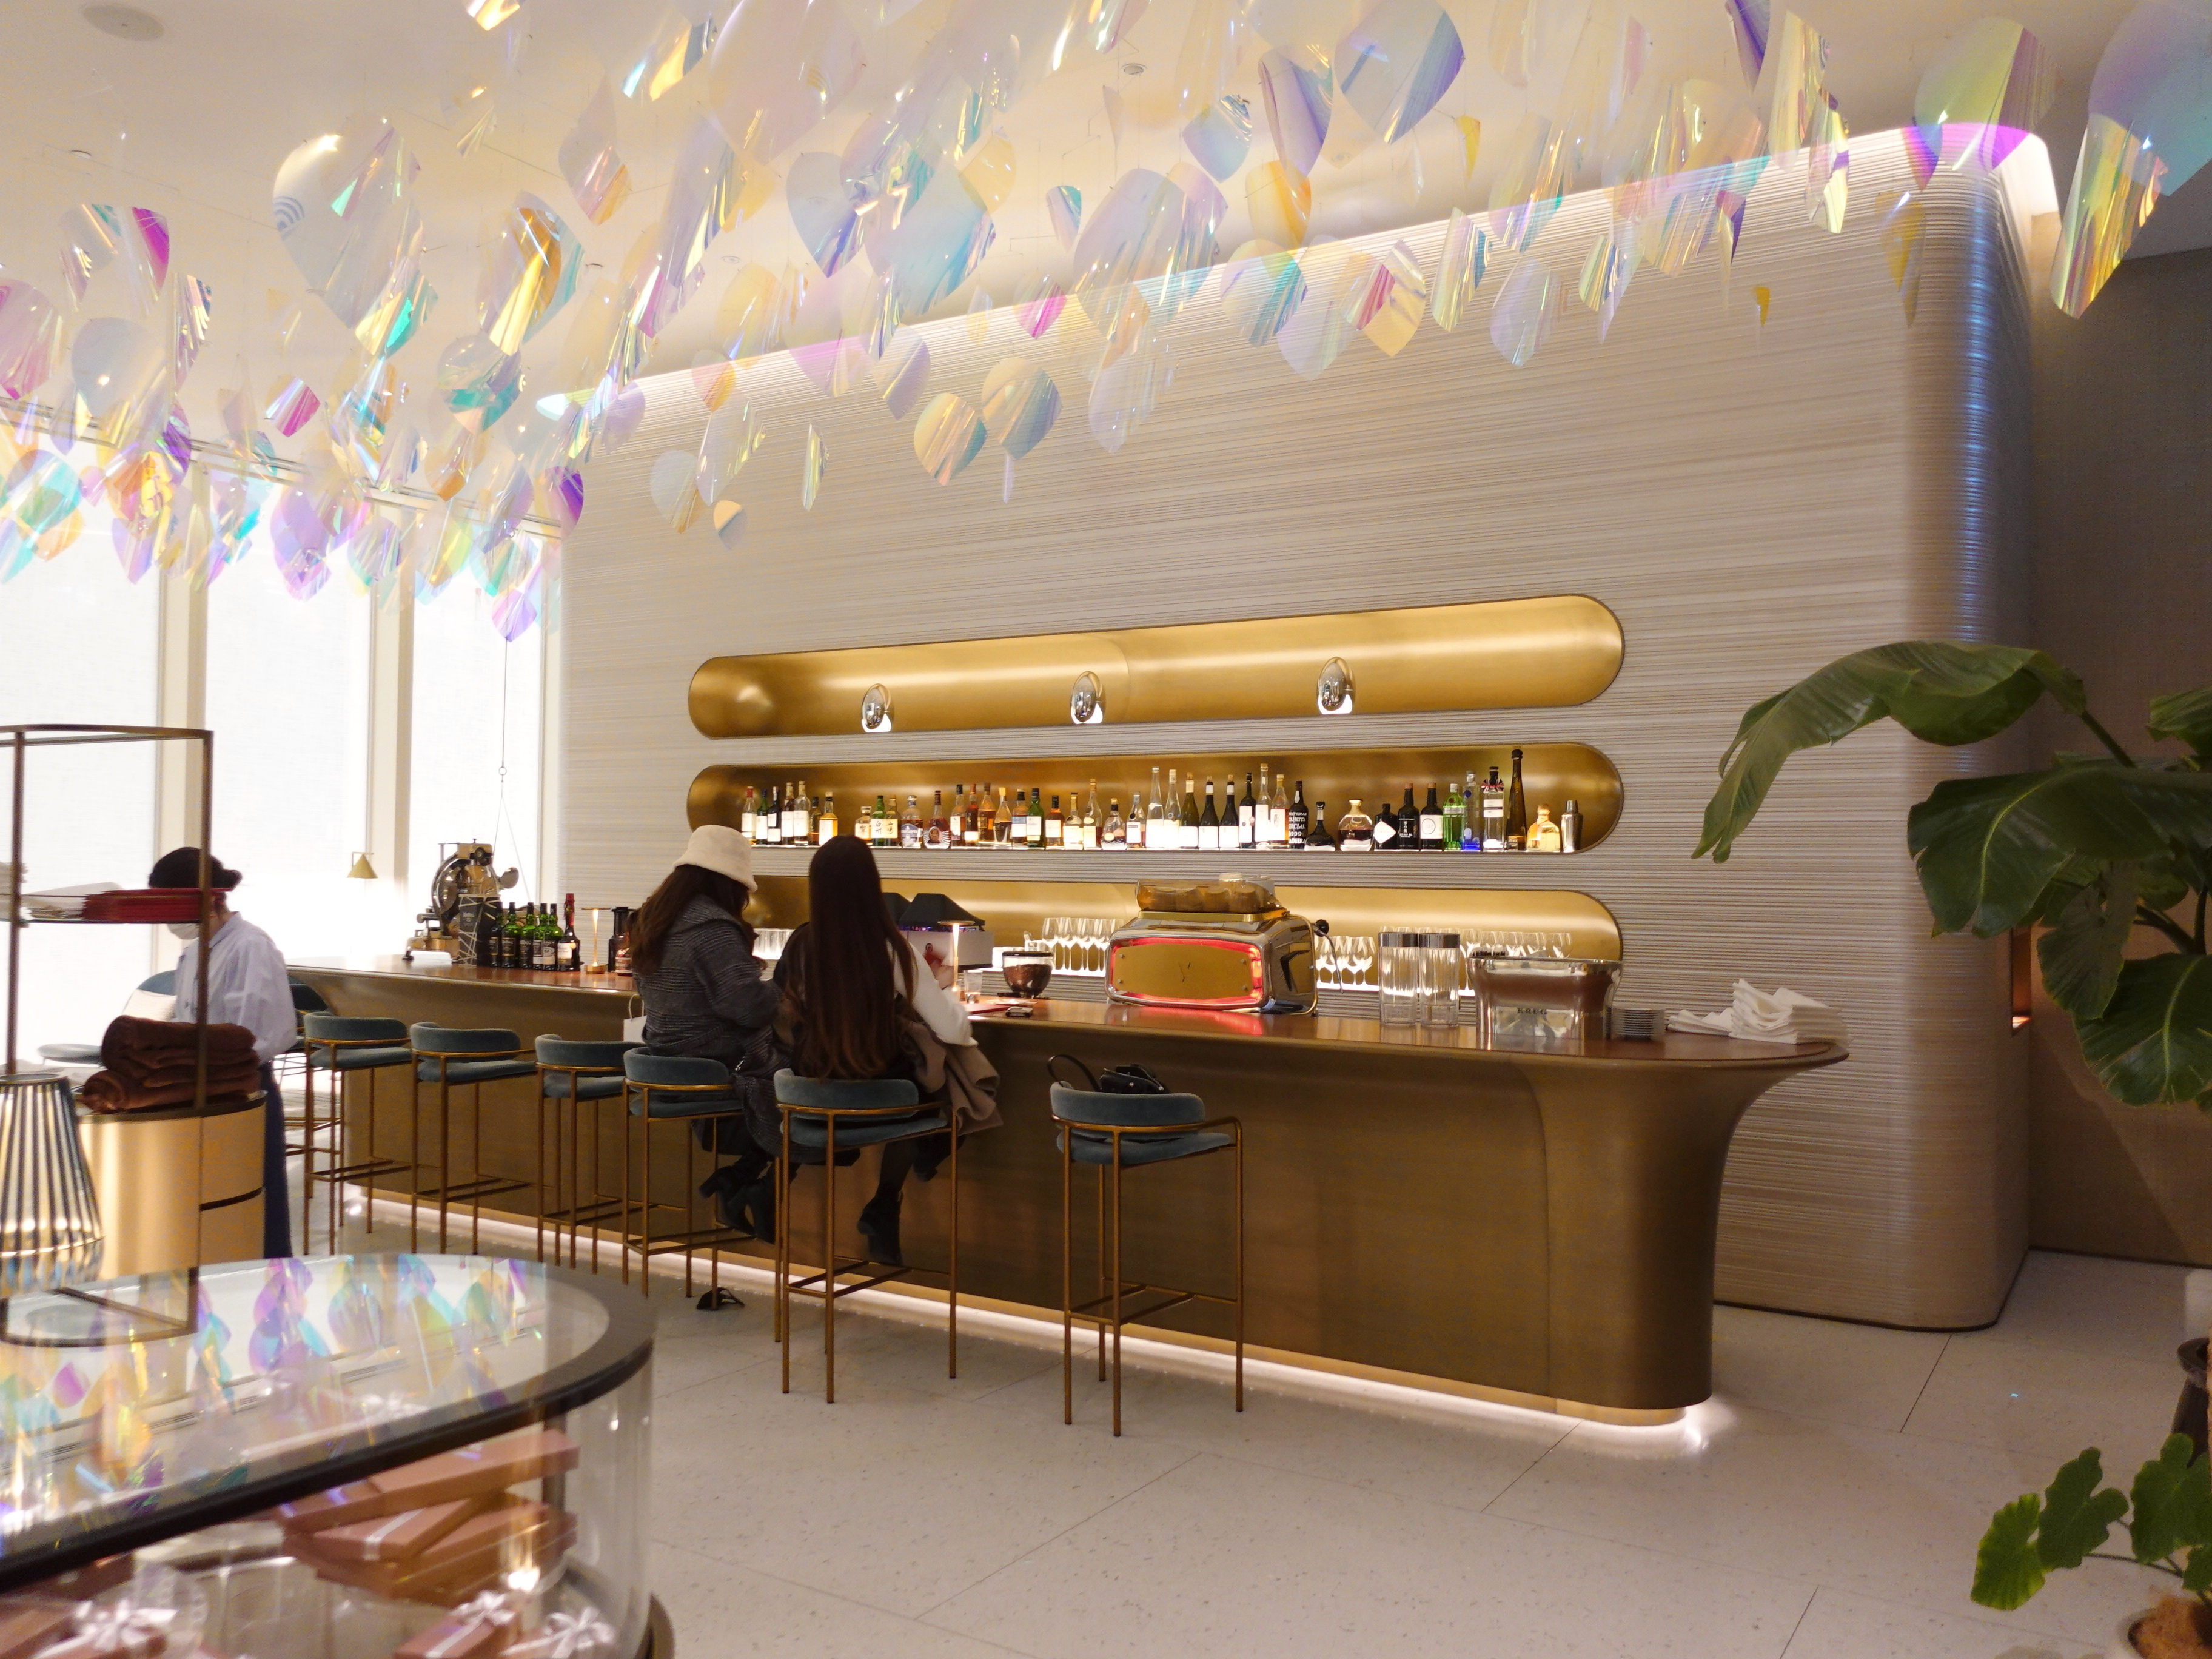 LE CAFE V, Osaka: The first Louis Vuitton cafe in the world